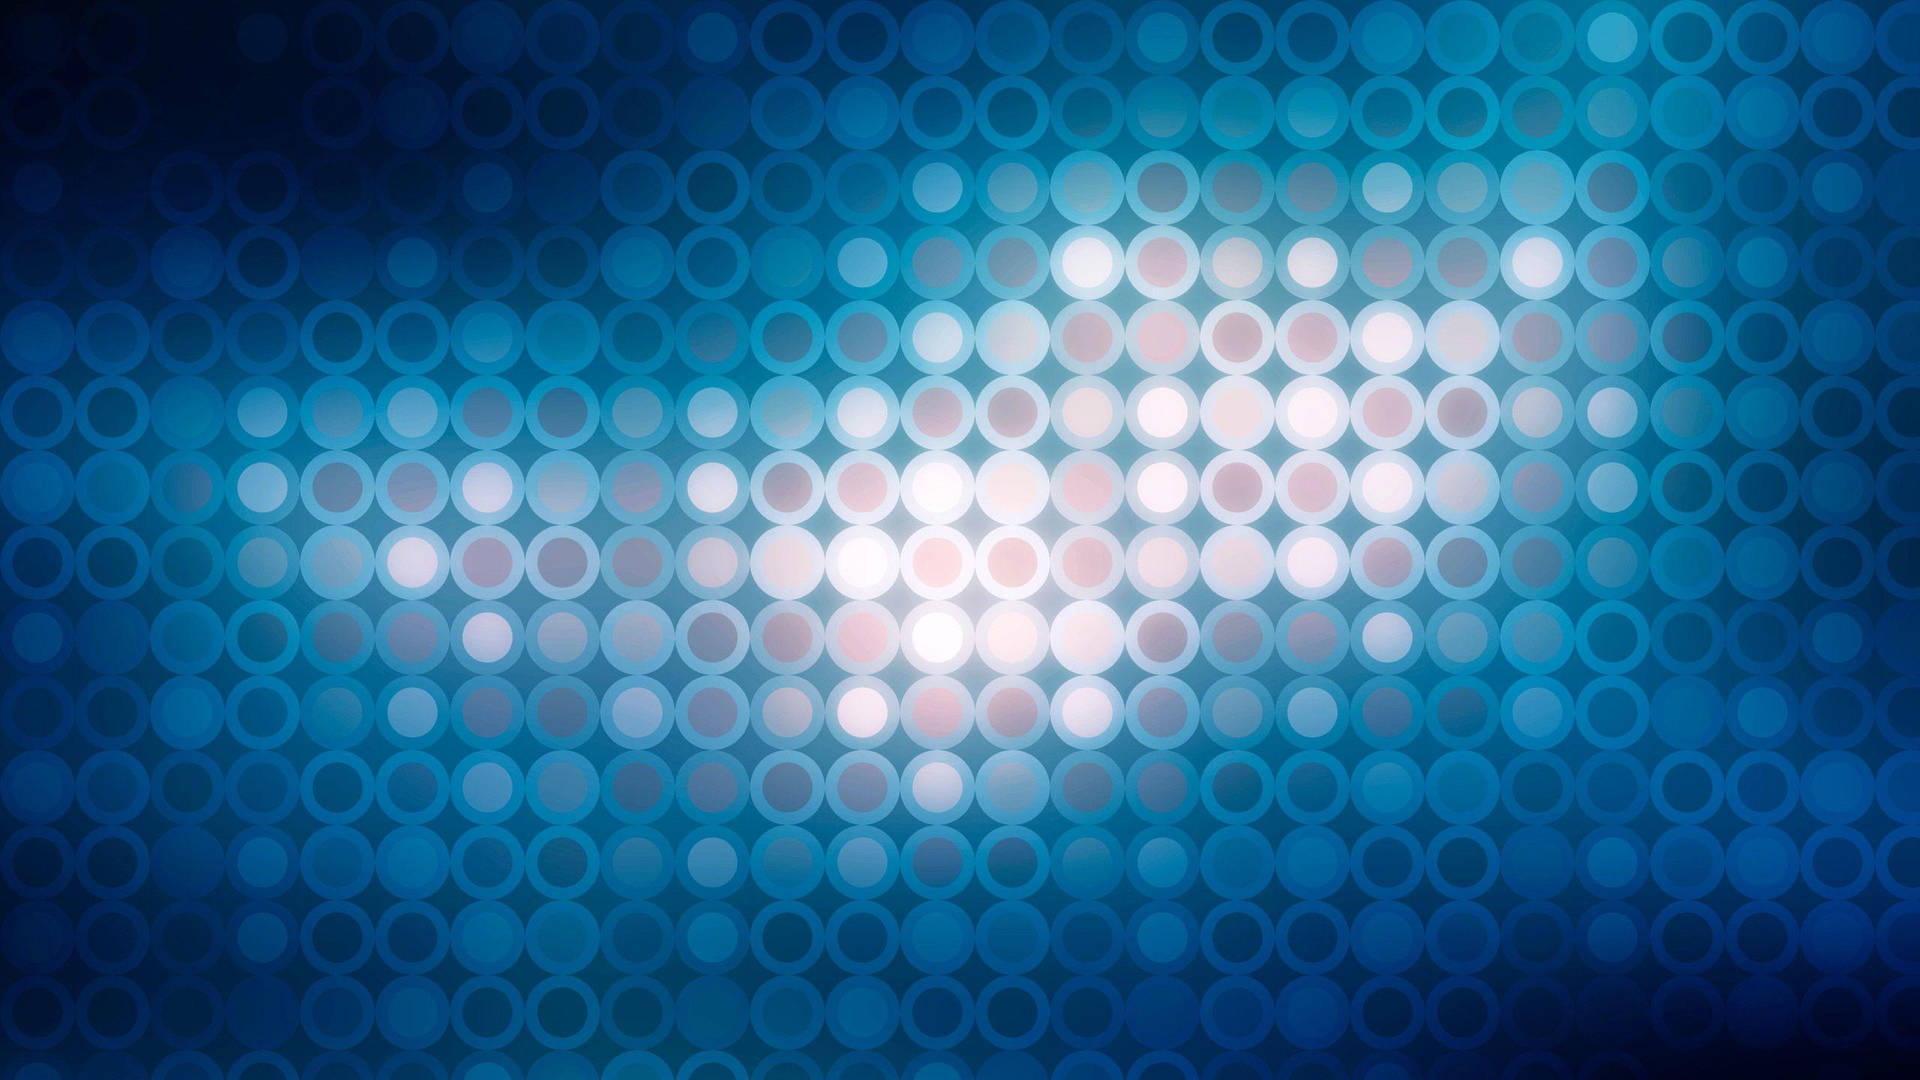 Appropriate Pattern Of Lights And Shapes Wallpaper